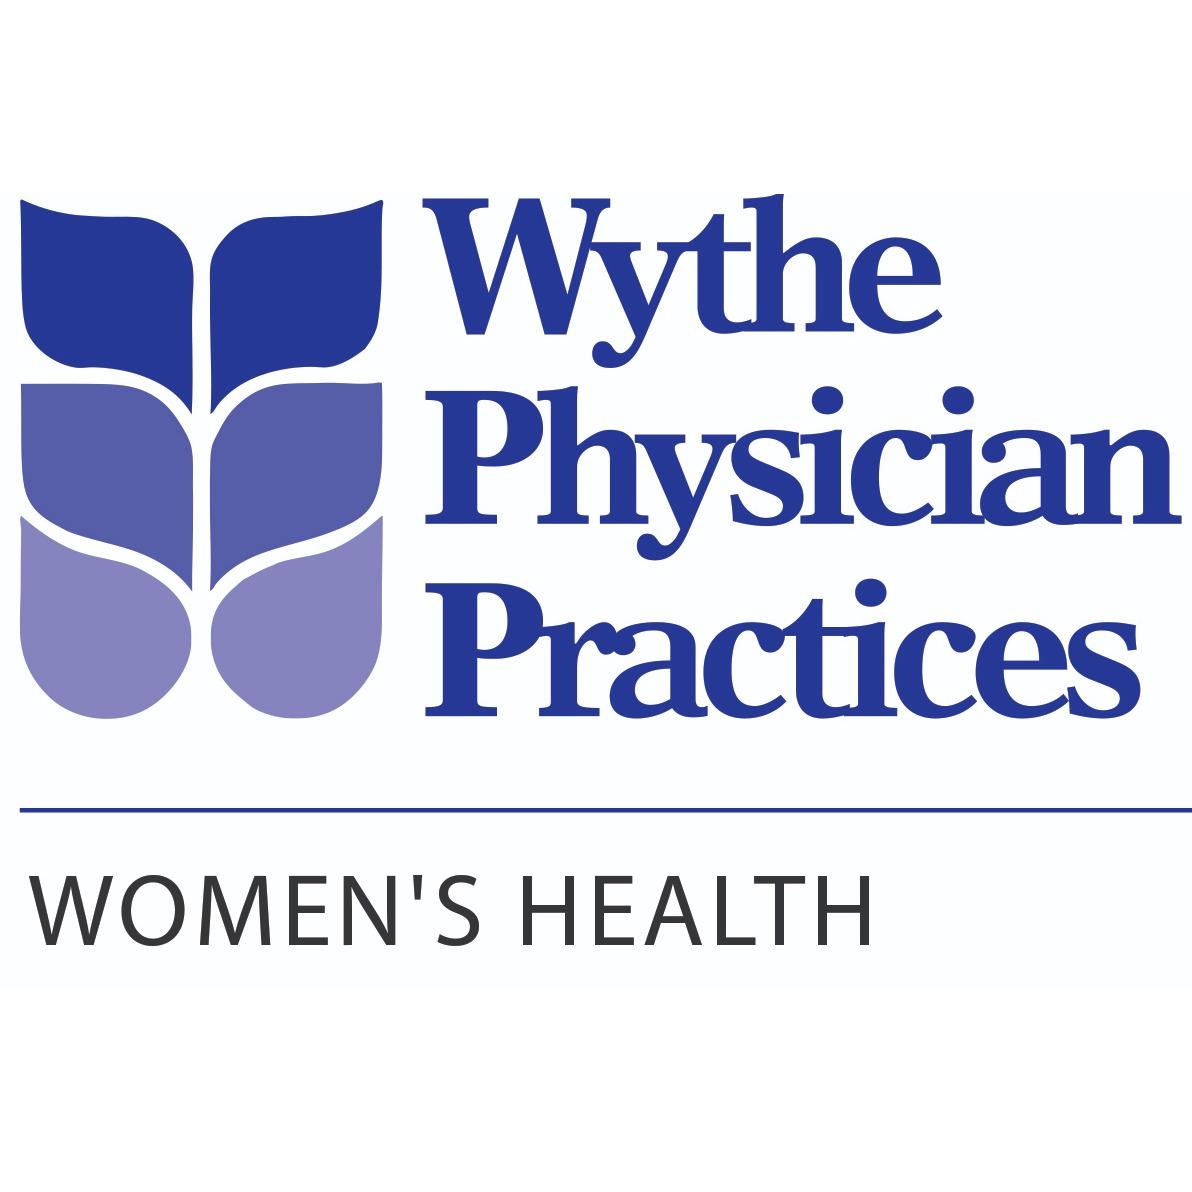 Wythe Physician Practices - Womens Health Logo